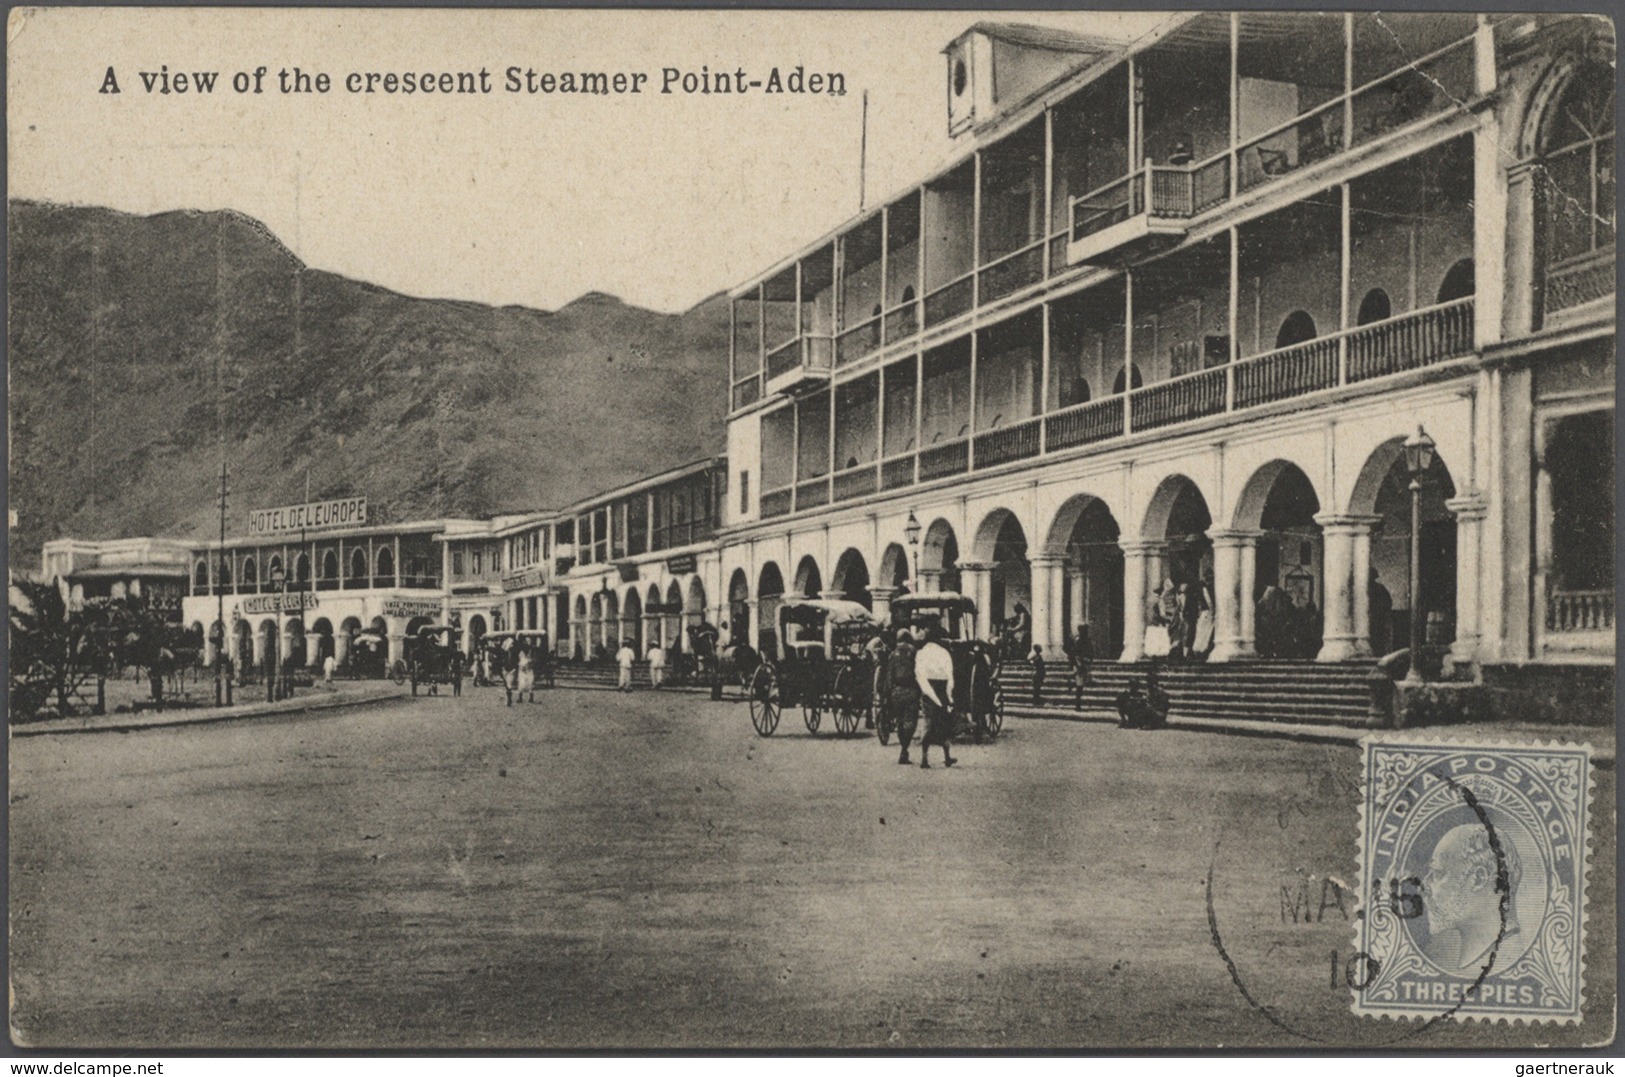 Aden: 1849-1937 "MAIL SENT FROM ADEN": Collection of about 90 covers, postcards and postal stationer